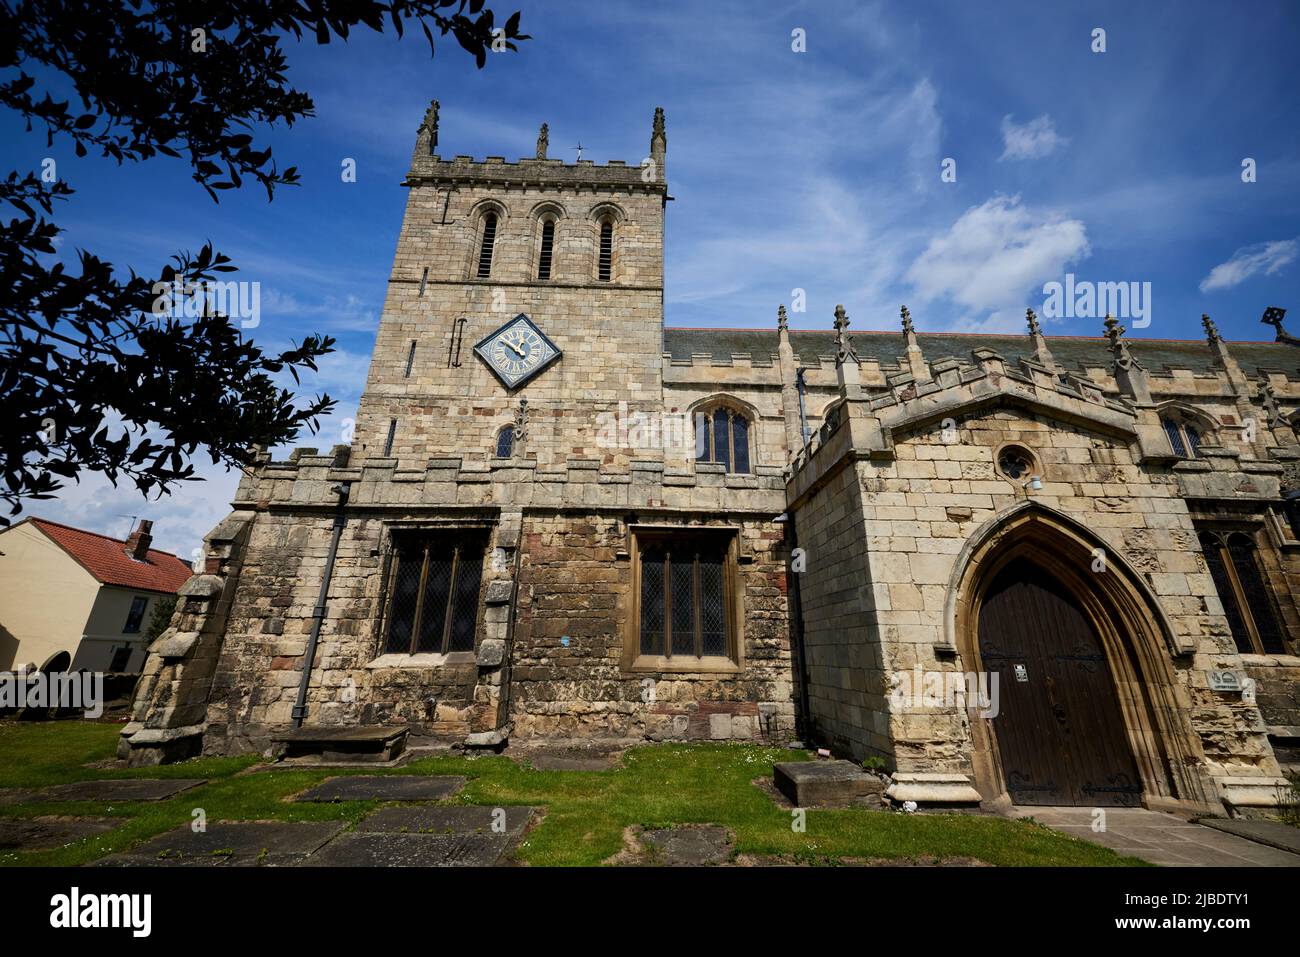 St Laurence Priory, Snaith near Goole, East Yorkshire, England UK in the village of Snaith Market Place Stock Photo